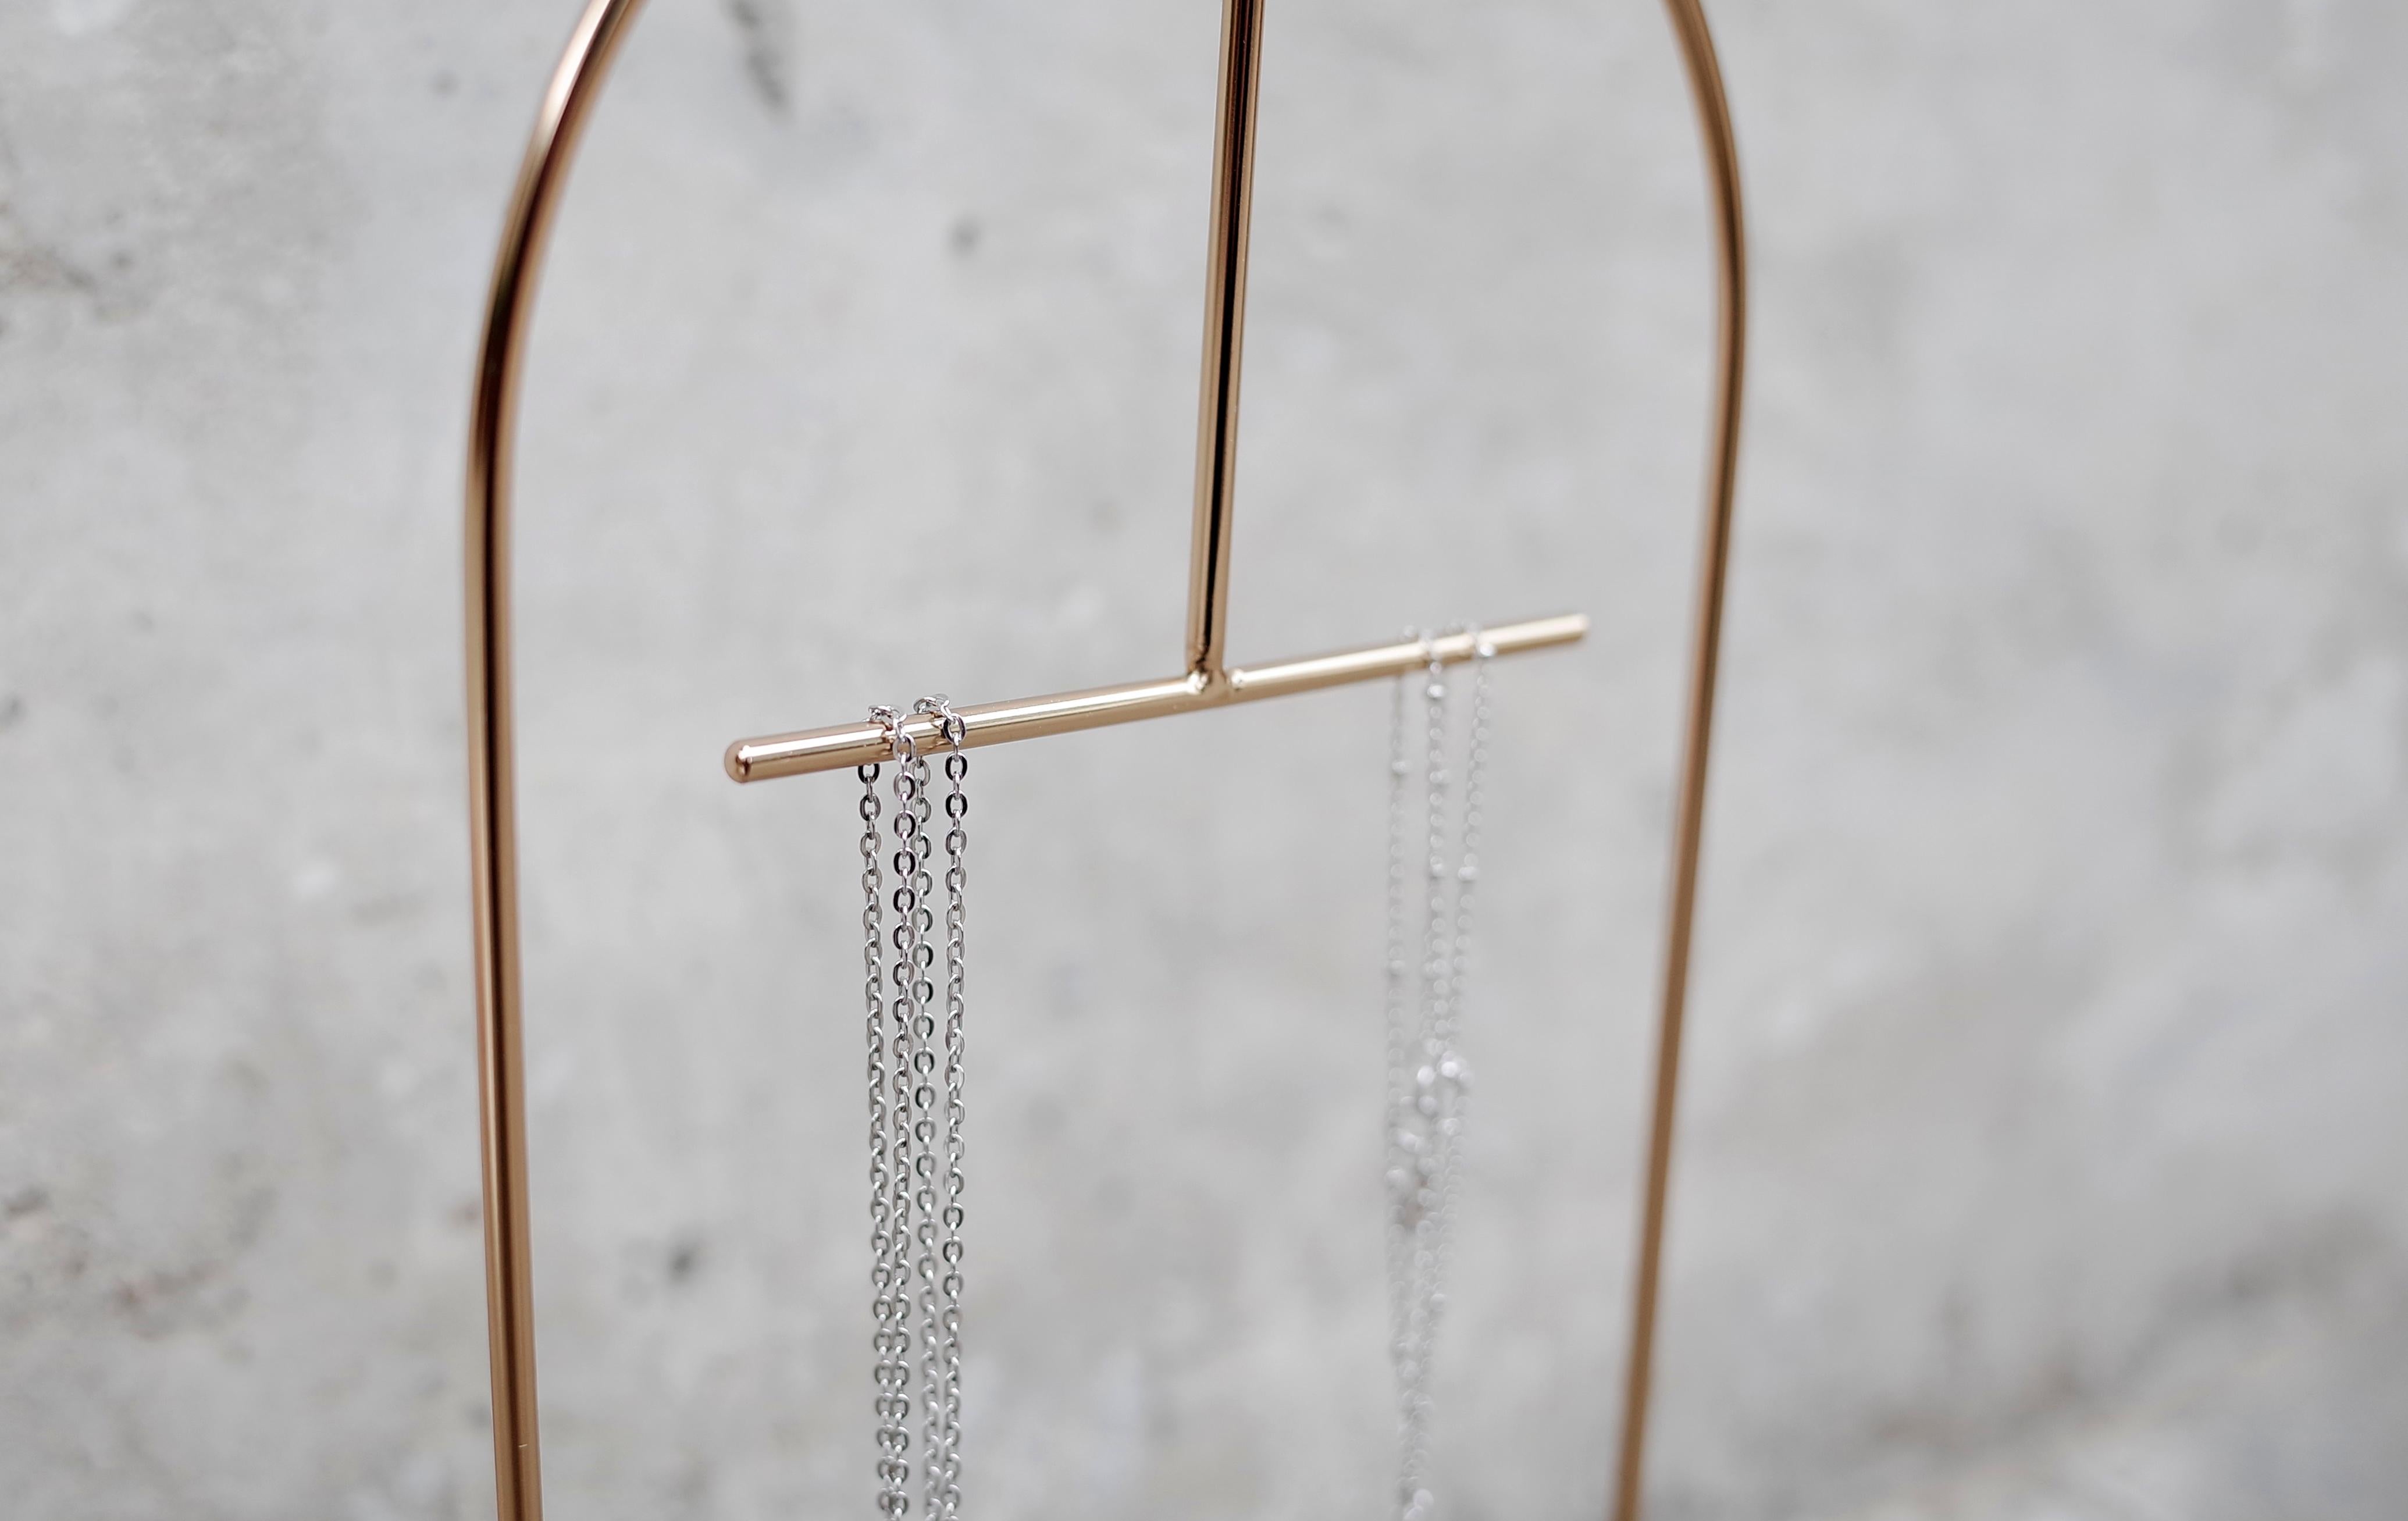 The Gilded Jewellery Stand makes organising and displaying your favourite earrings and necklaces simple and sophisticated. Crafted using stainless steel with a copper finish and a marble basin, its minimal design emphasises your jewellery's opulence